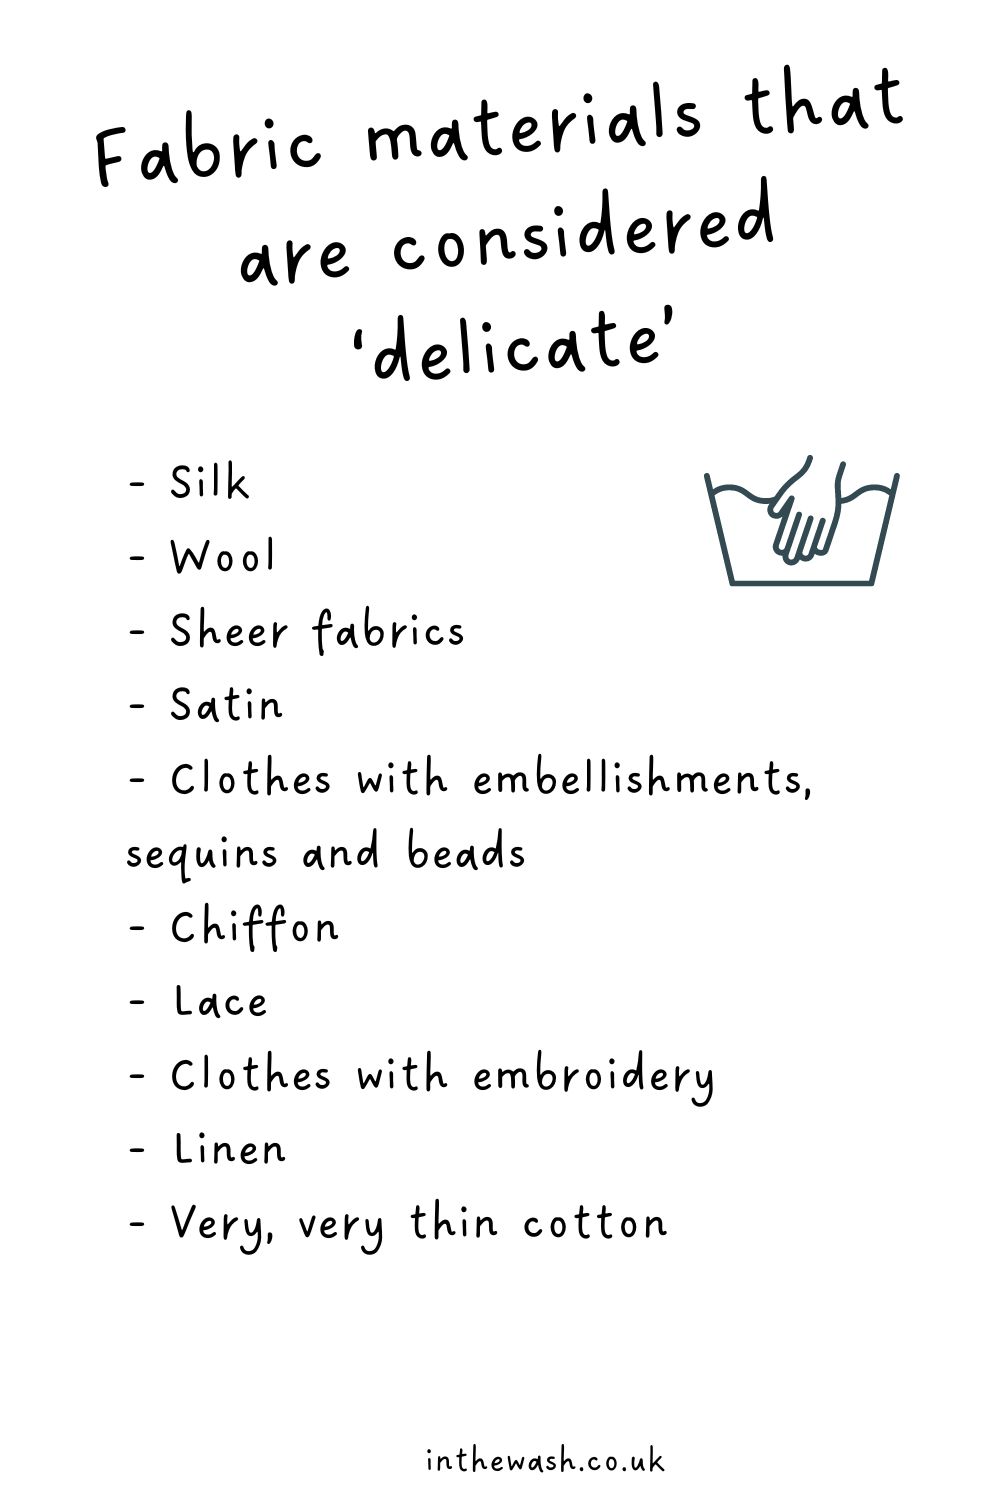 What is considered delicate clothing?